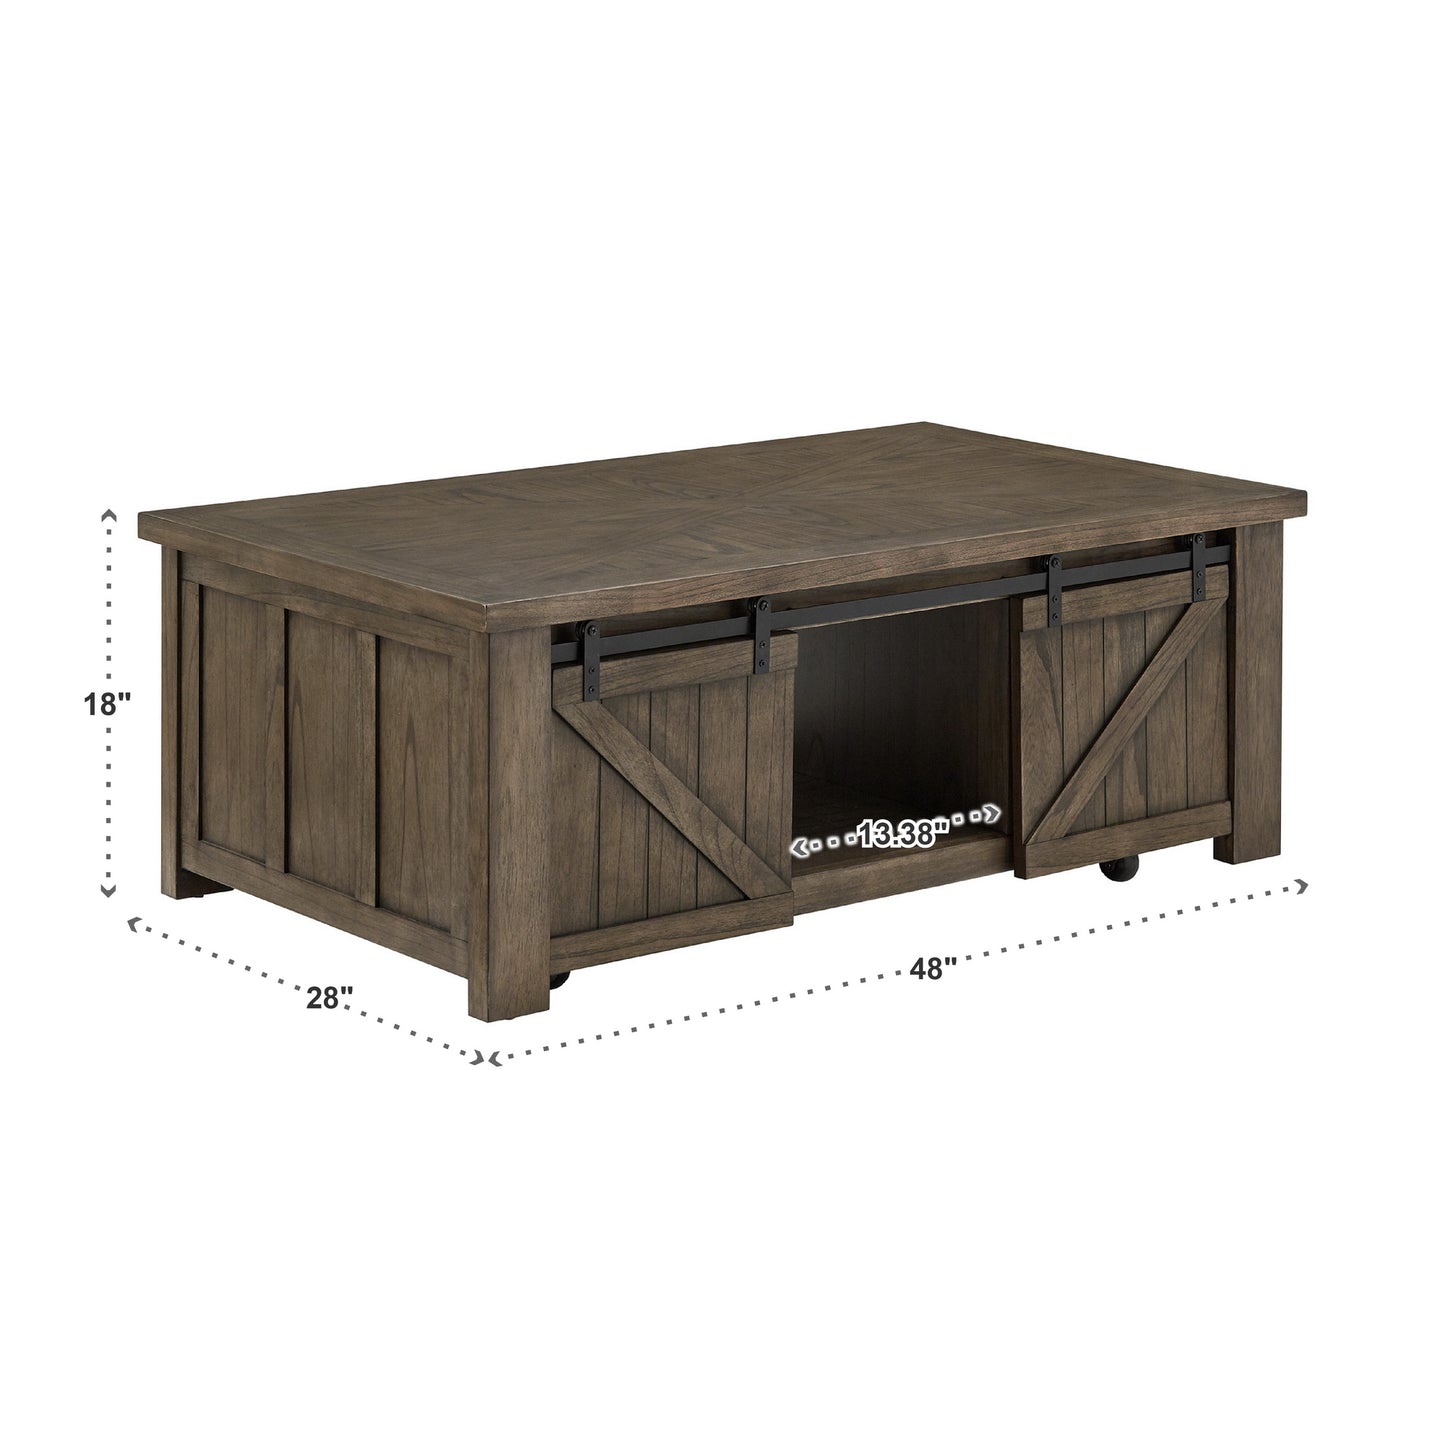 Barn Door Coffee Table with Storage - Antique Grey Finish